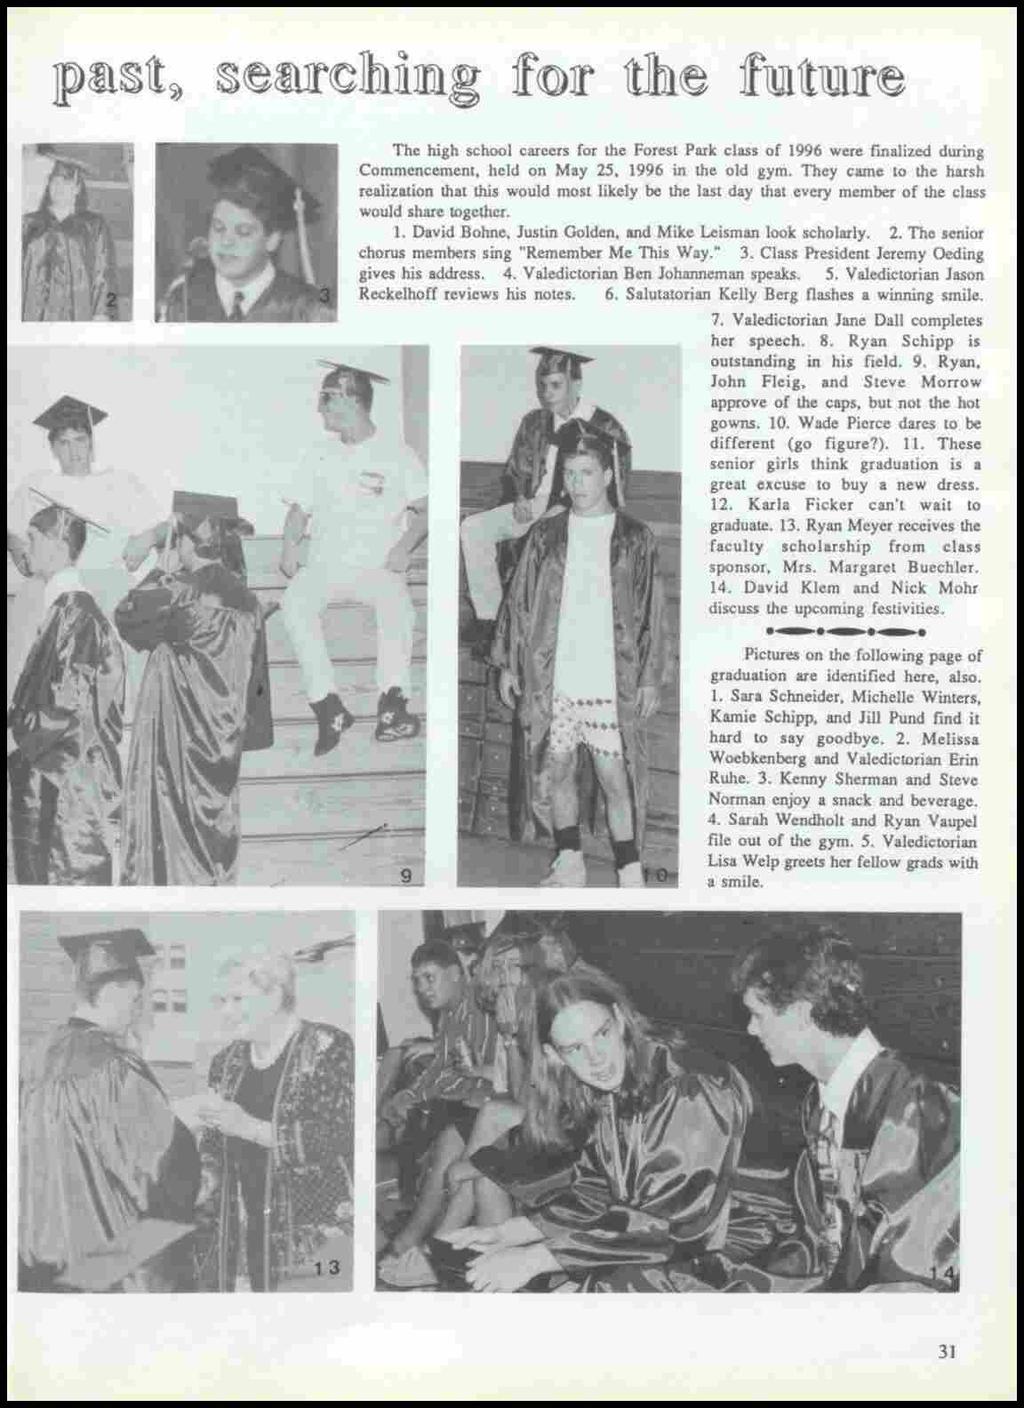 The high school careers for the Forest Park class of 1996 were frnalized during Commencement, held on May 25, 1996 in the old gym.